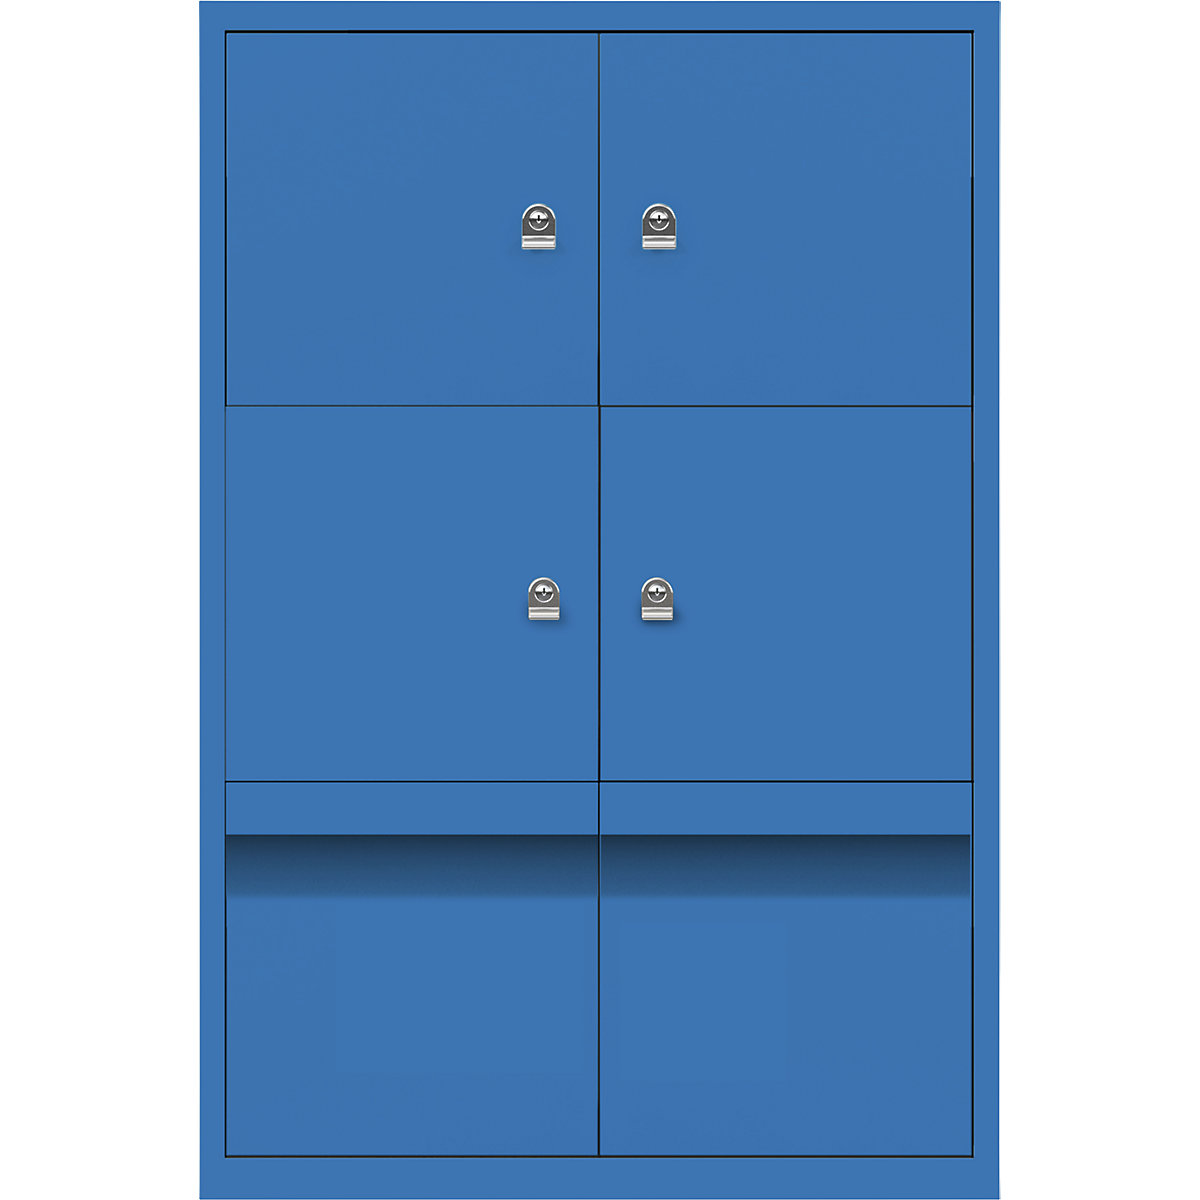 LateralFile™ lodge – BISLEY, with 4 lockable compartments and 2 drawers, height 375 mm each, blue-29